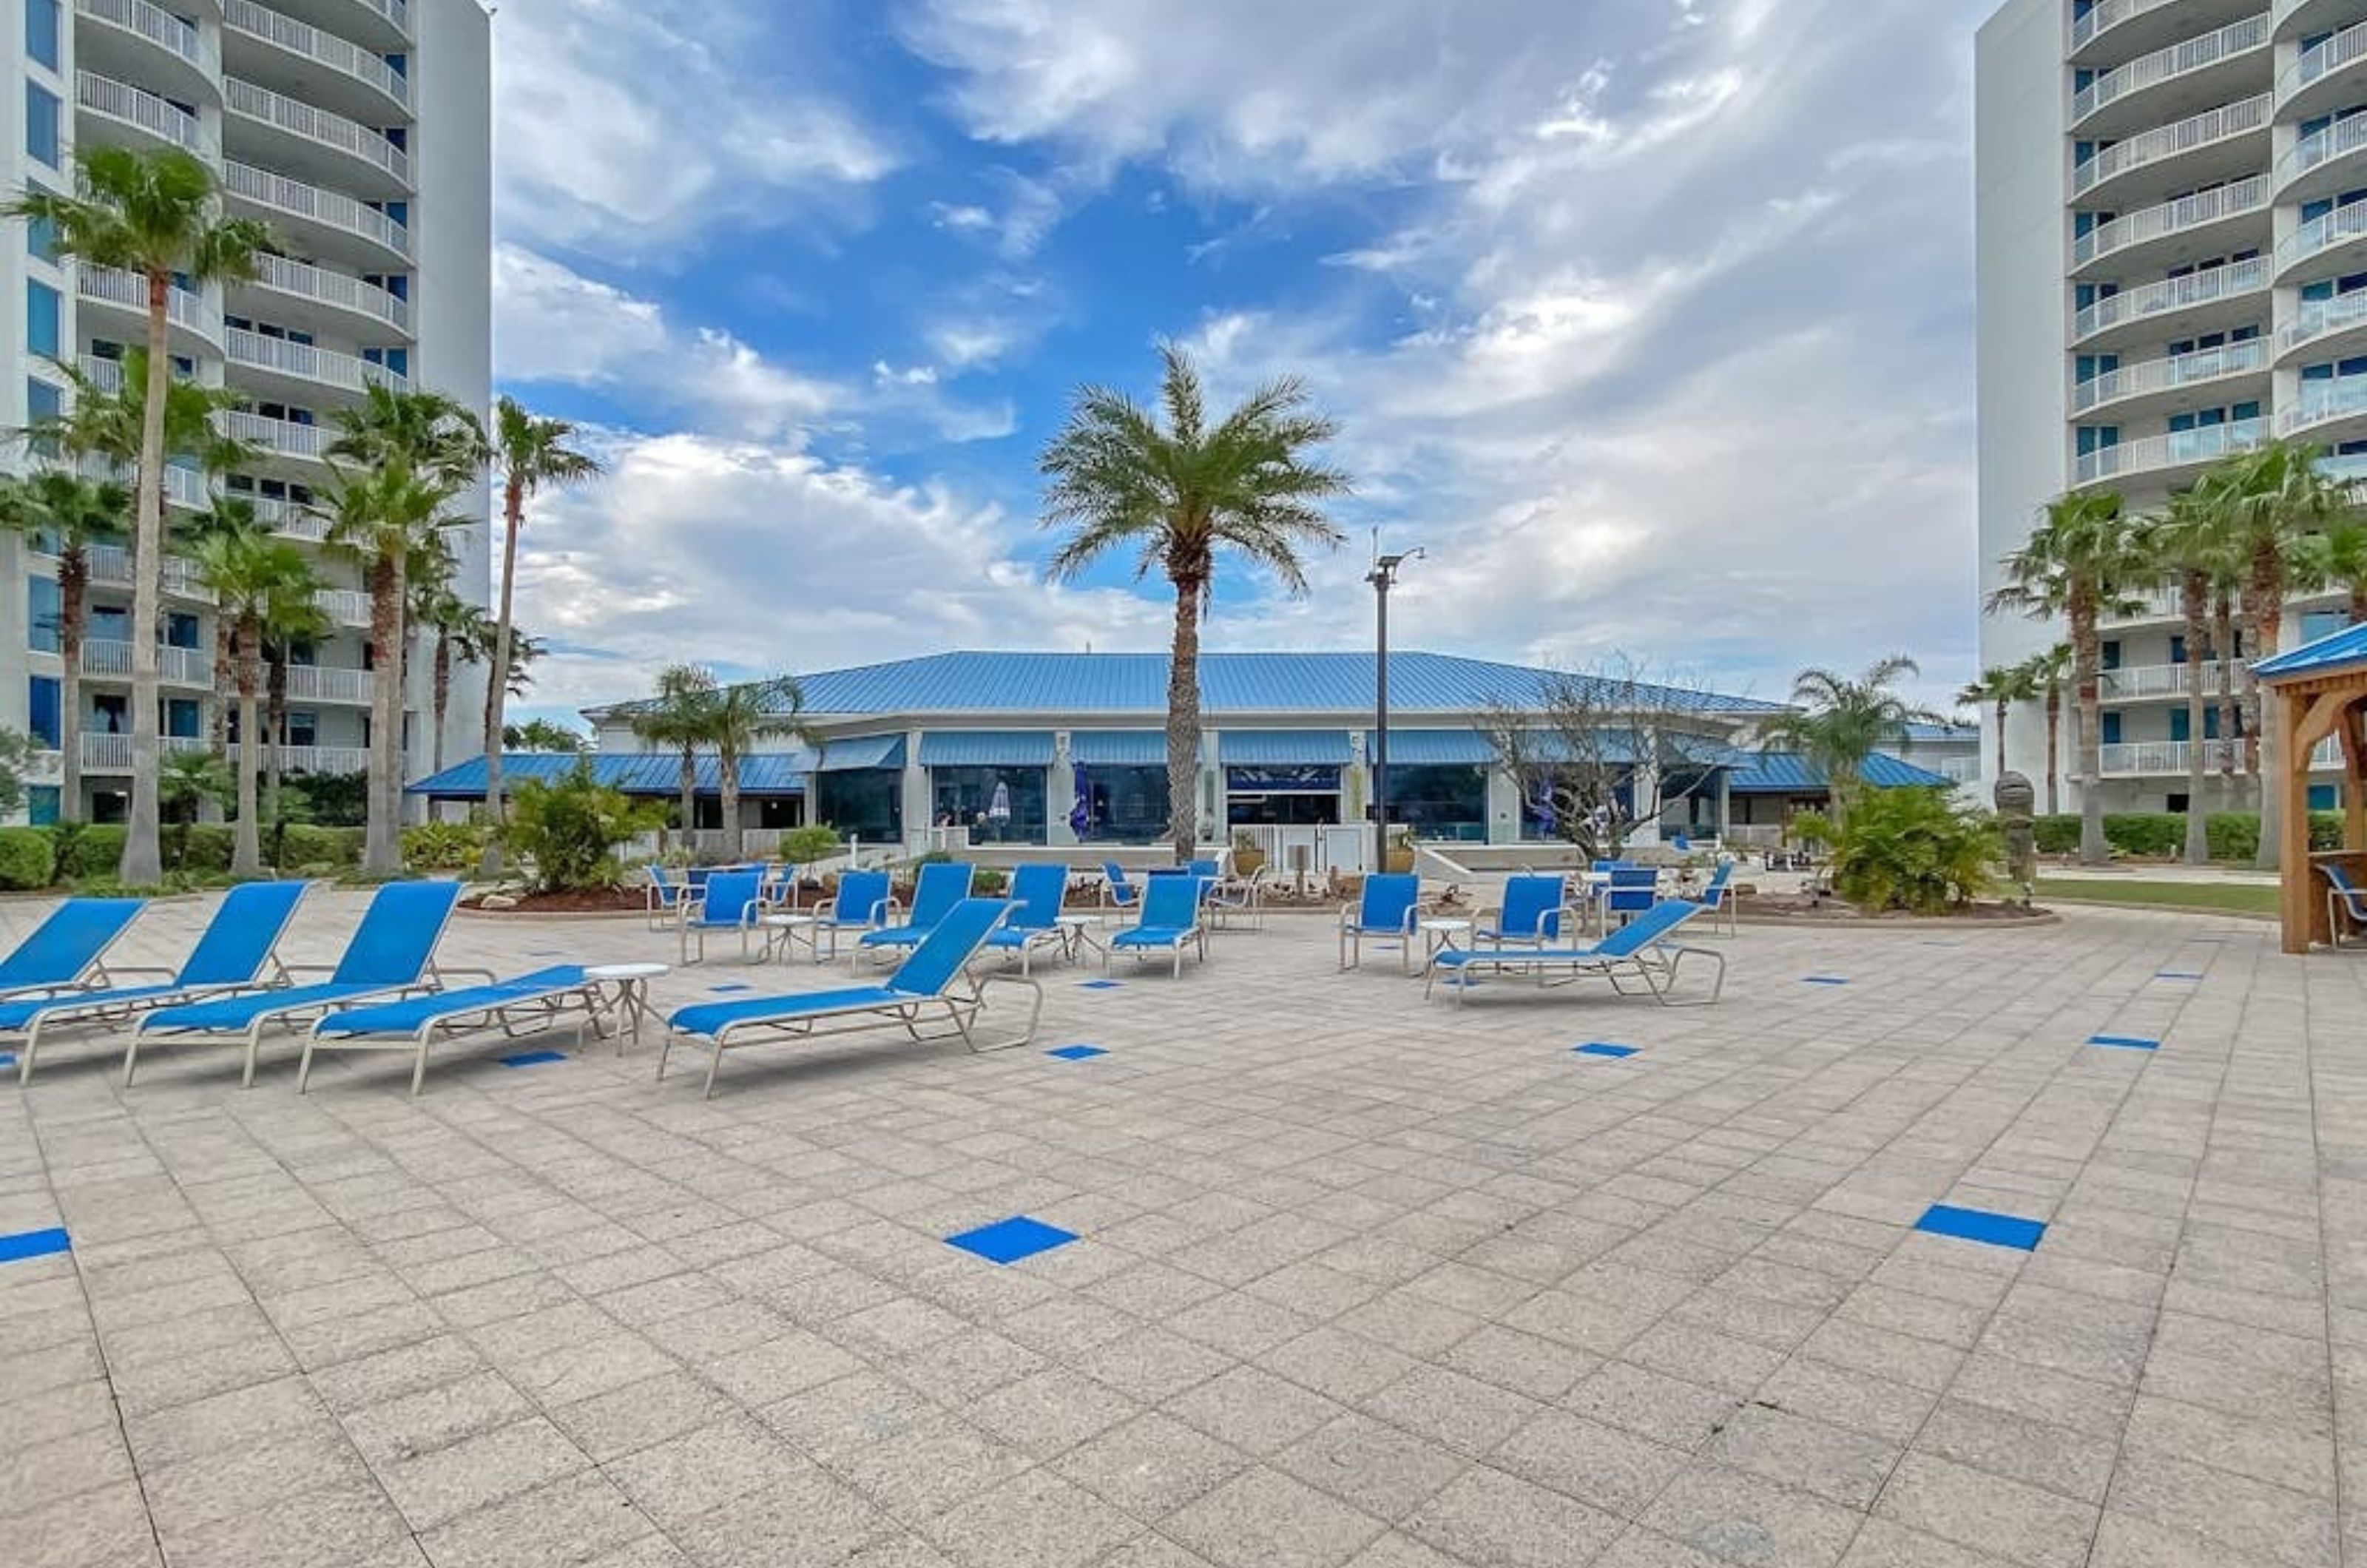 The spacious pool deck at the Palms of Destin with lounge chairs 